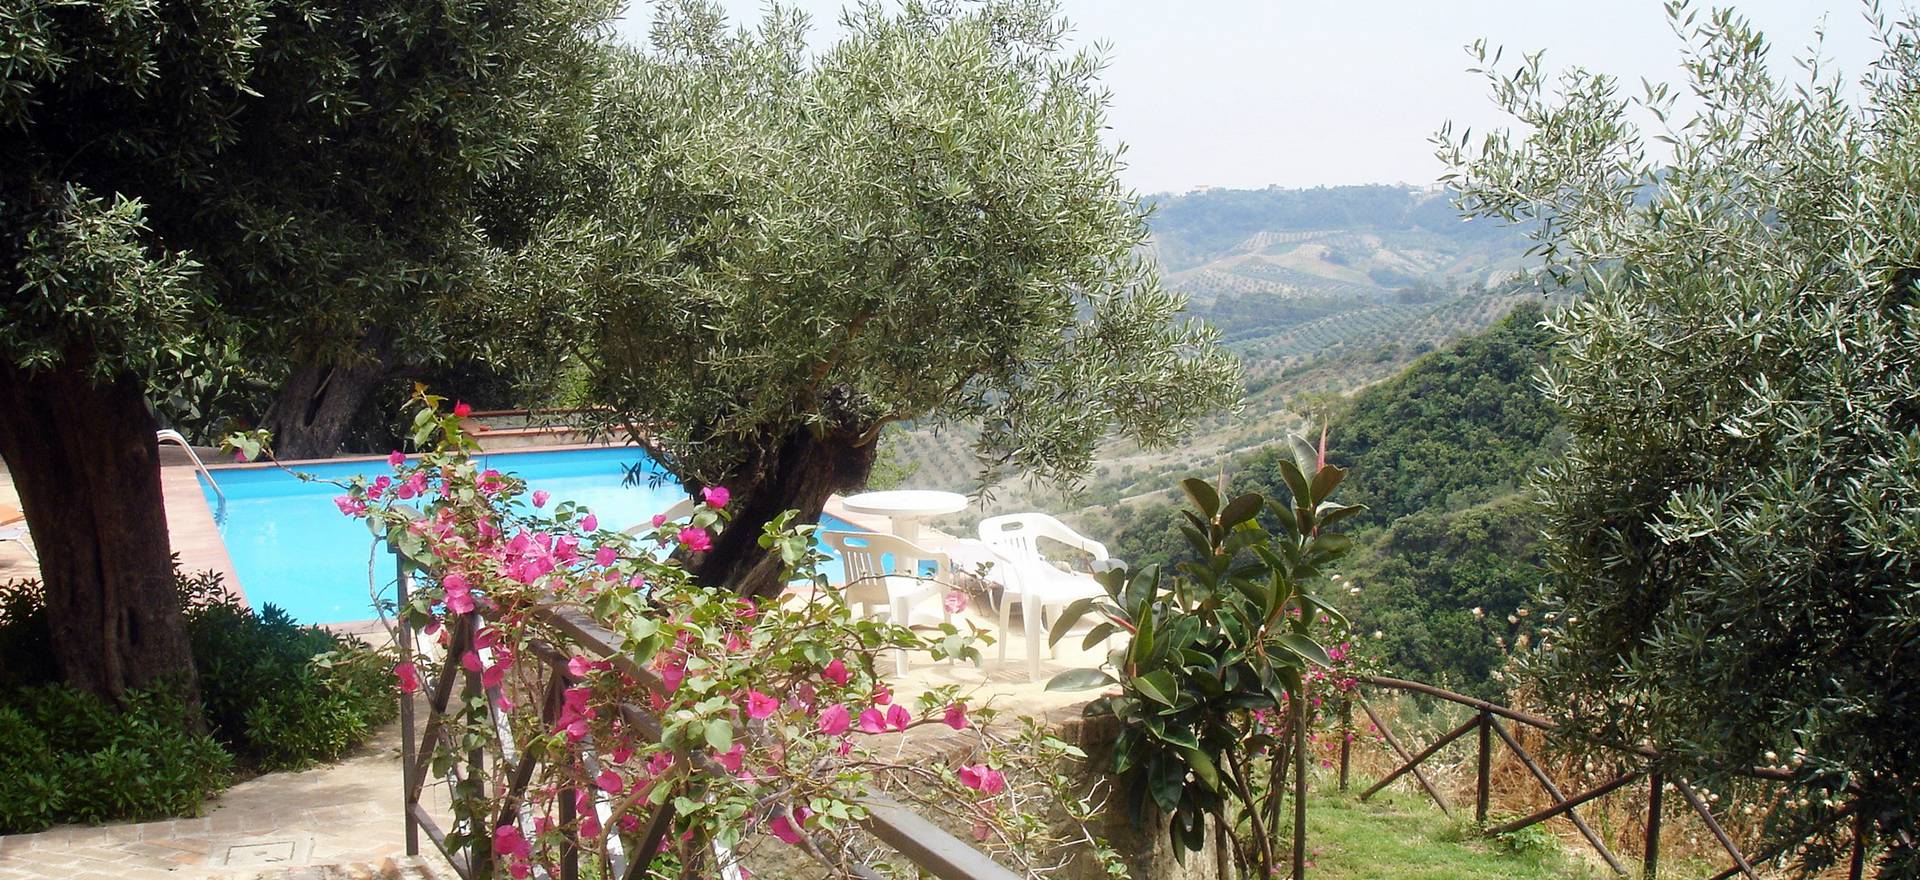 Agriturismo Calabria Agriturismo in Calabria for culture, beach and culinary delights